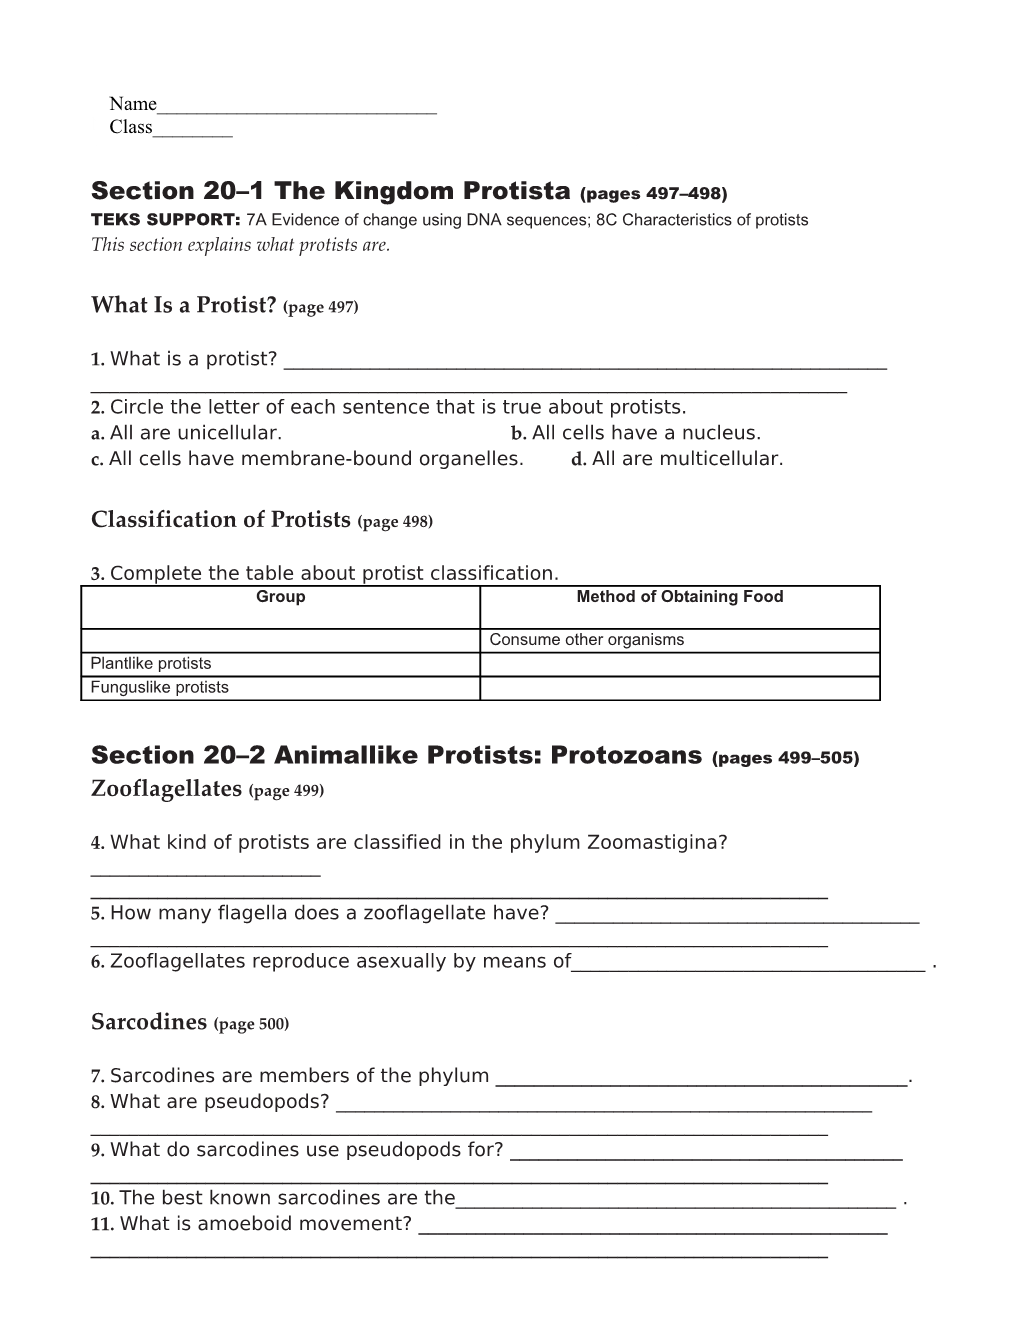 Section 20 1 the Kingdom Protista (Pages 497 498)